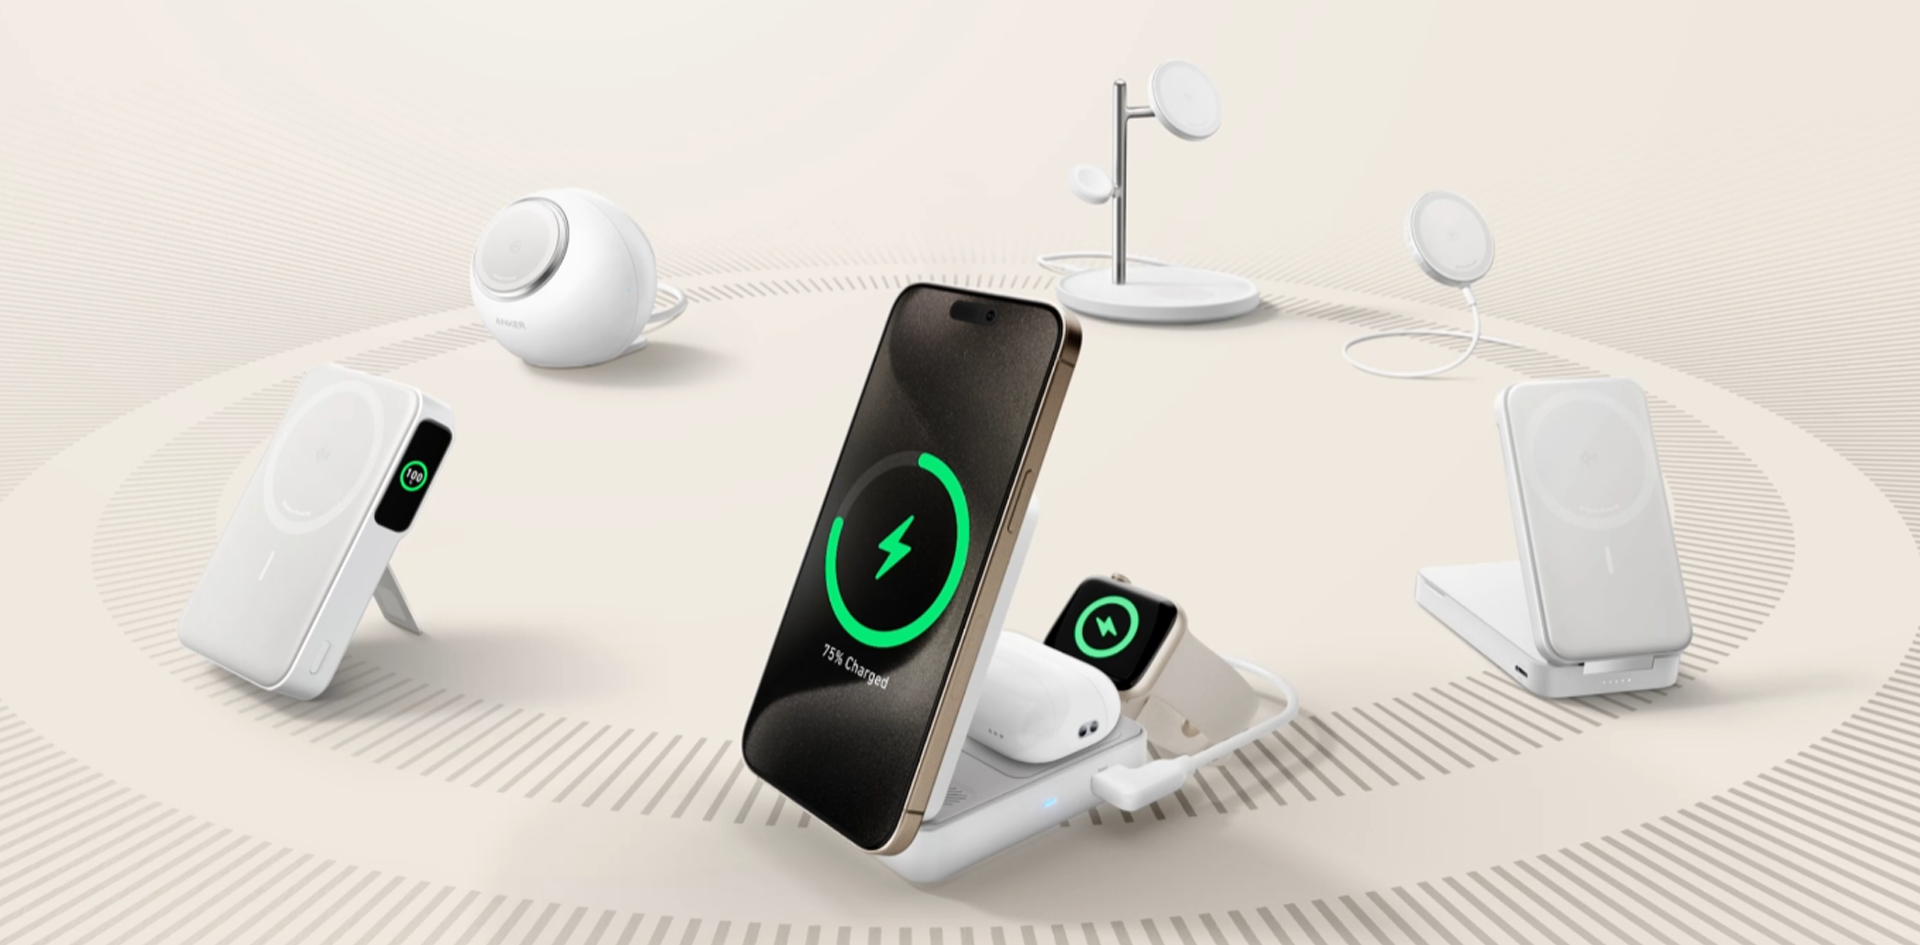 The Belkin 3 in 1 wireless charger with MagSafe. Pricey but totally next  level : r/MagSafe